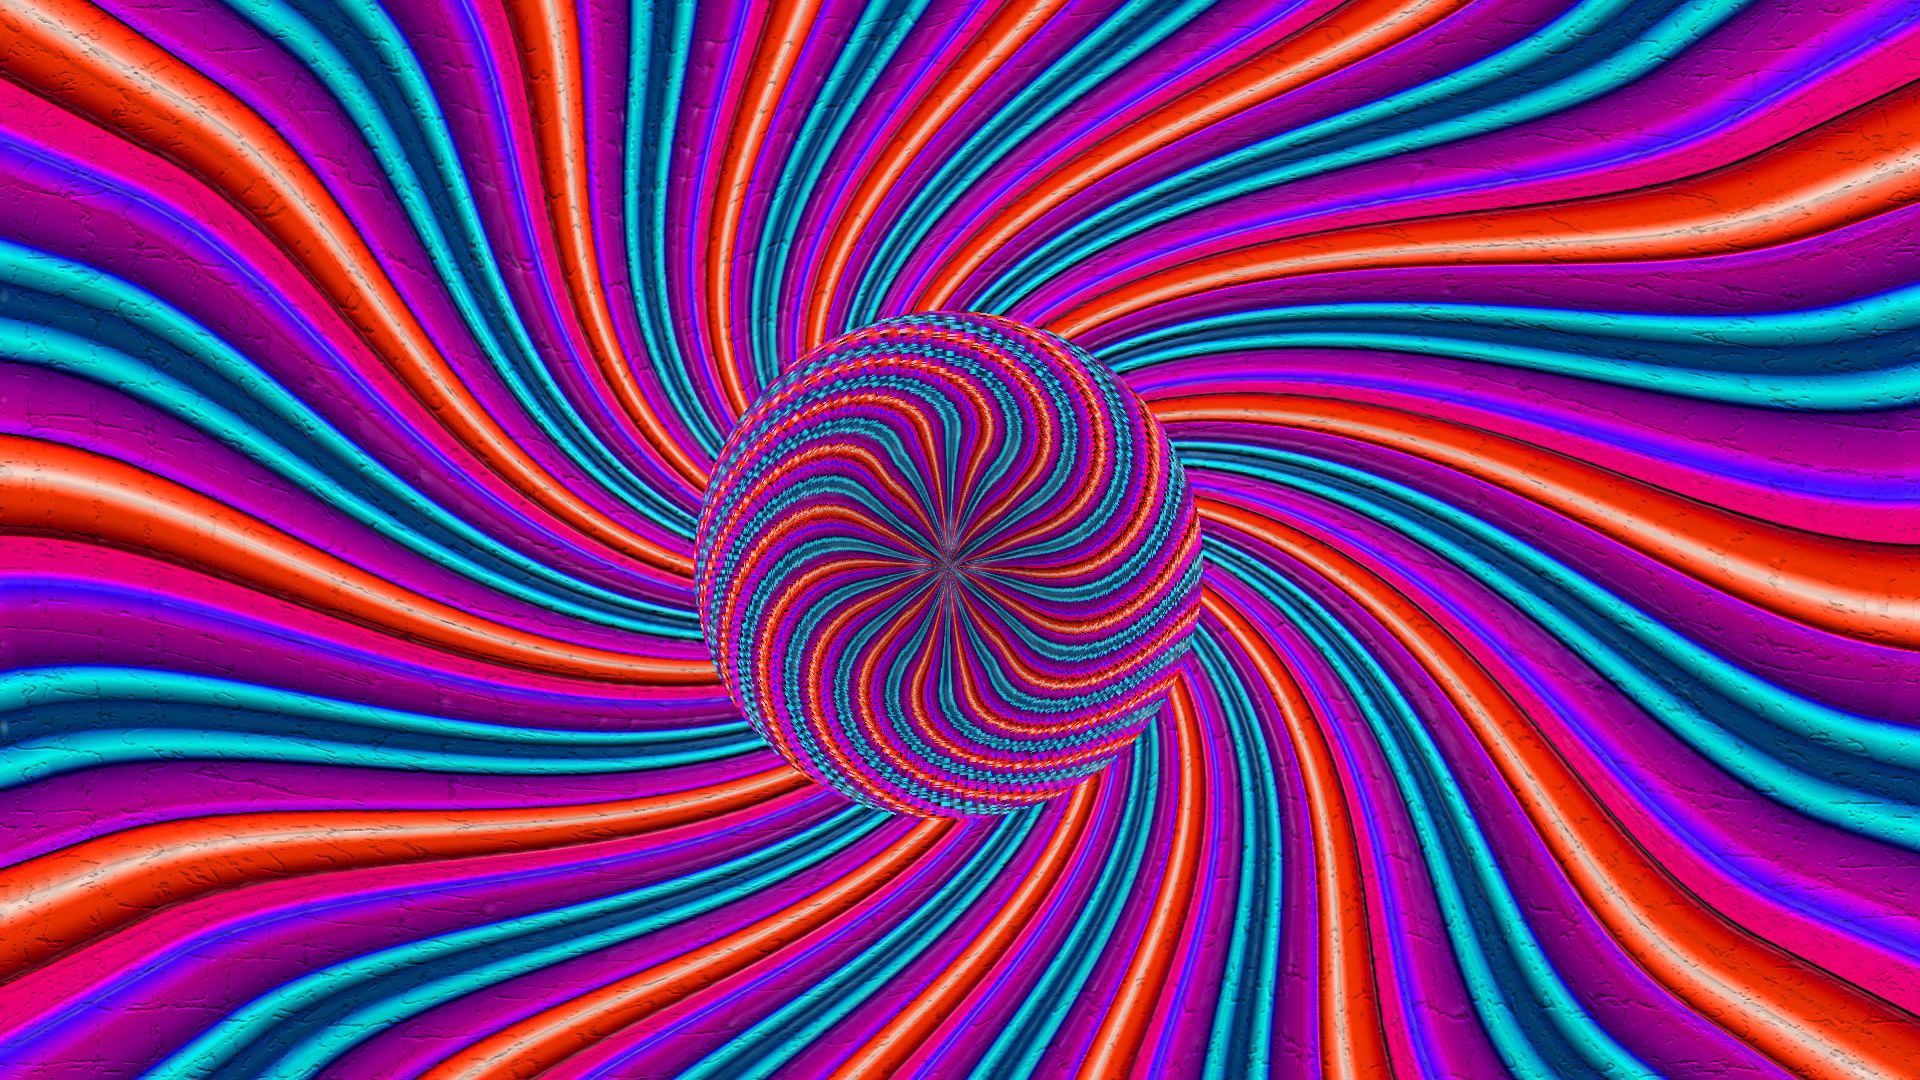 Download wallpaper 1920x1080 abstract, circles, lines, colored, optical ...